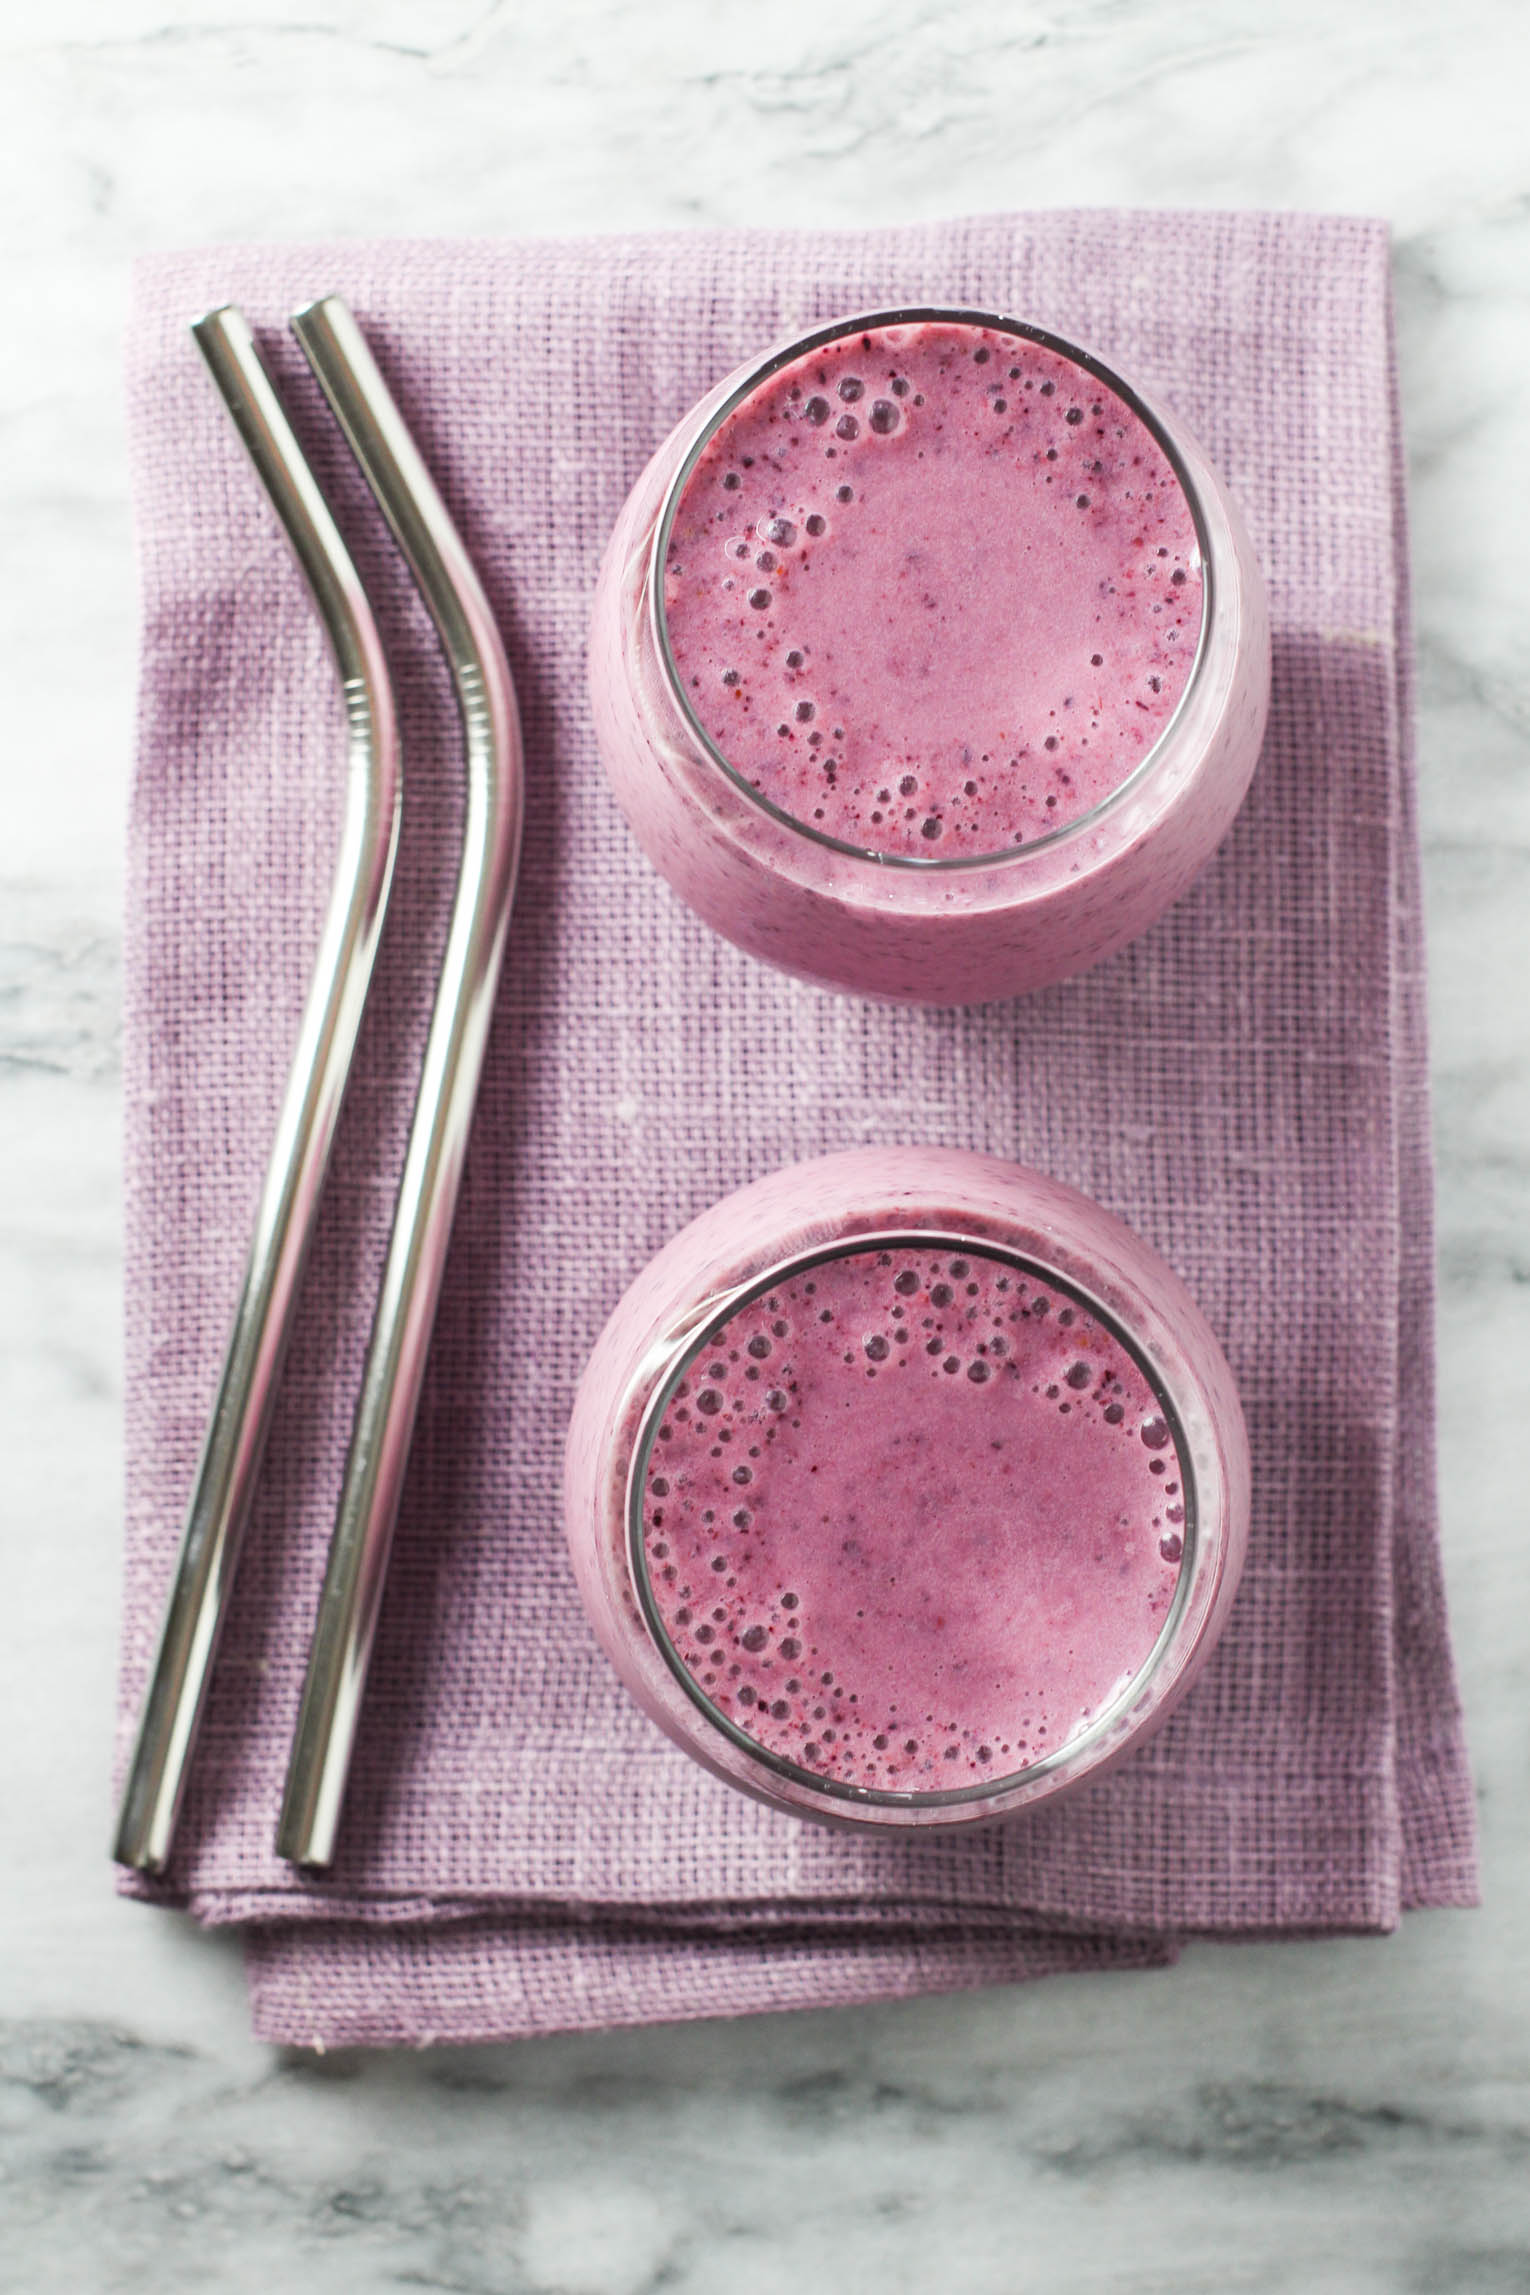 Overhead shot of two smoothie glasses standing on a tea towel. Two metal drinking straws to the left.